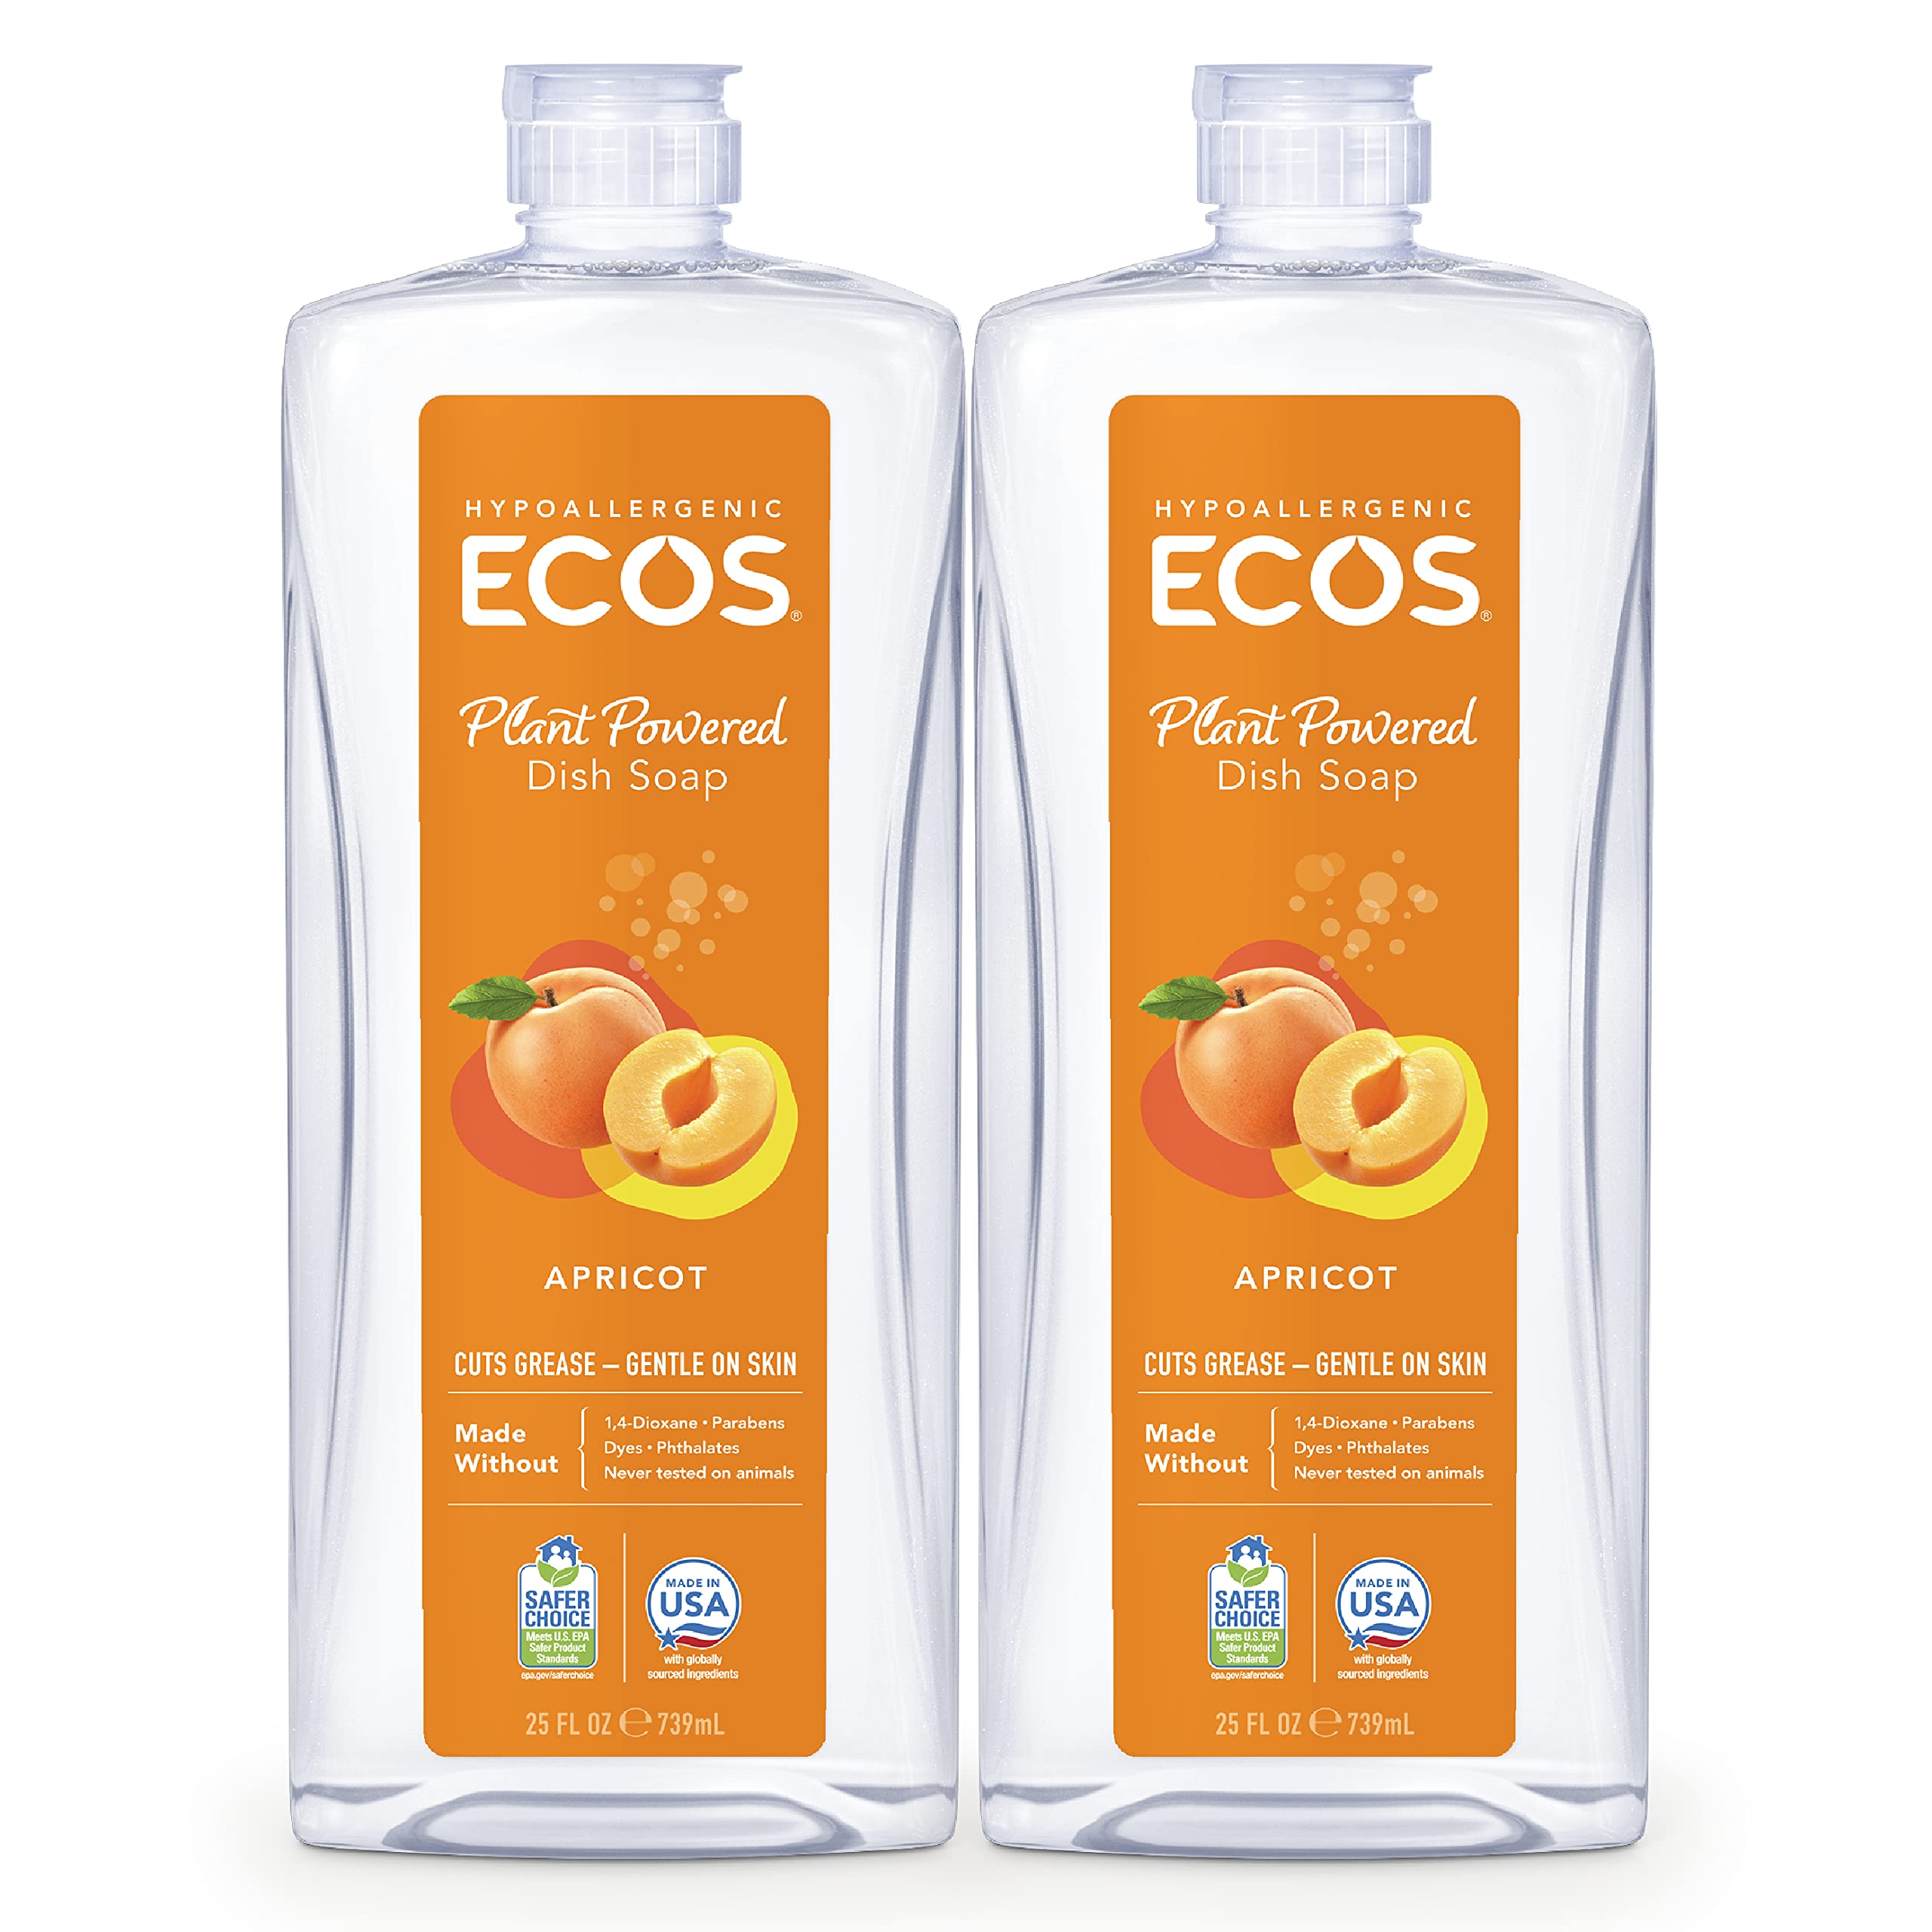 ECOS® Hypoallergenic Dish Soap, Natural Apricot, 25 Fl Oz (Pack of 2)